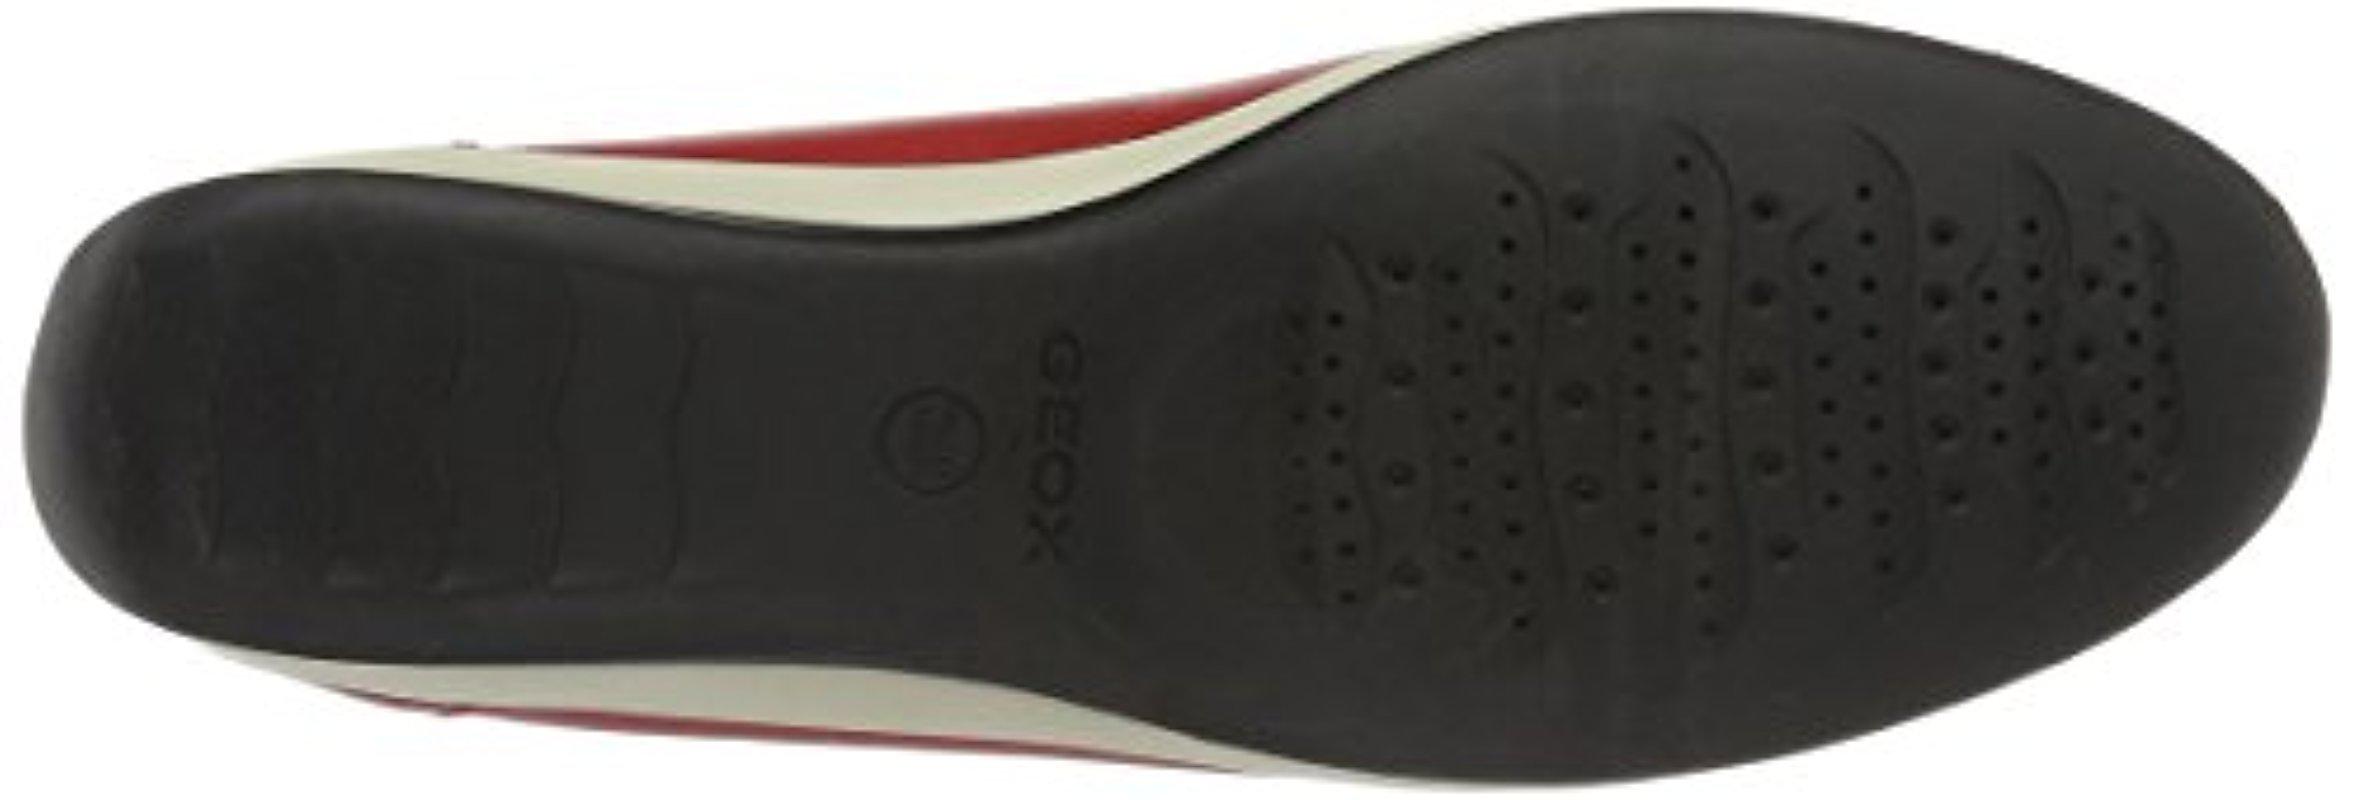 Geox D Yuki A Mocassins in Red/White (Red) | Lyst